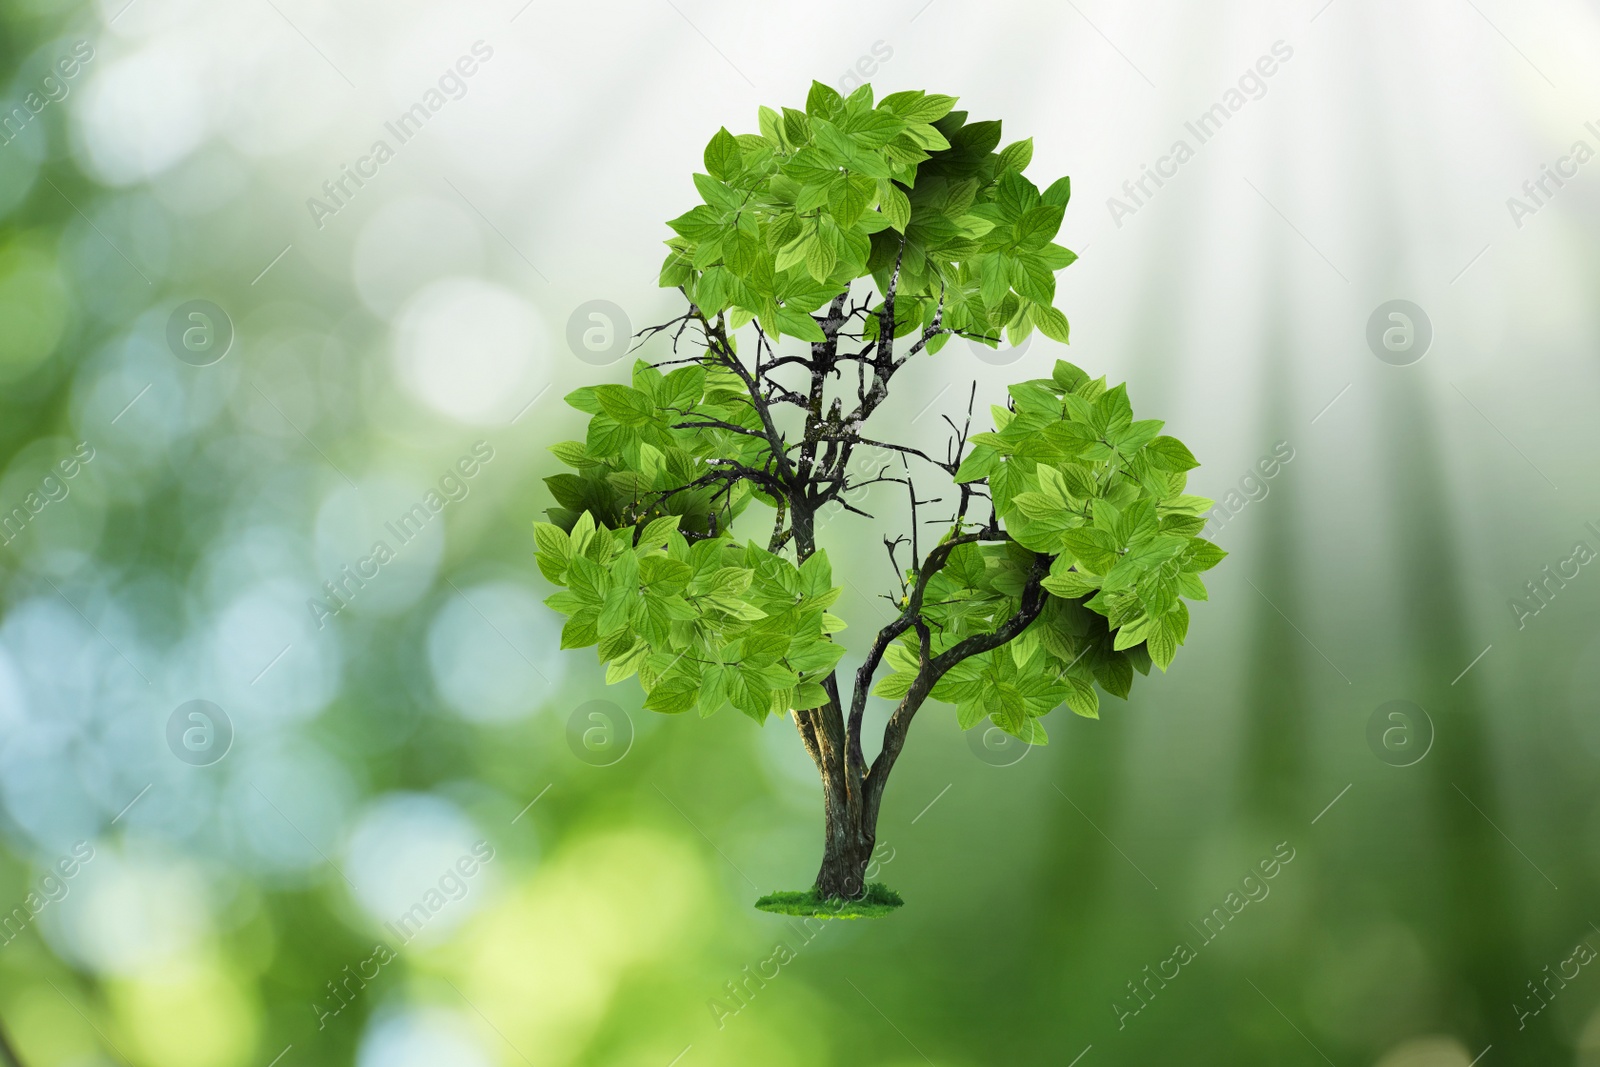 Image of Tree with green leaves in shape of recycling symbol on blurred background. Bokeh effect